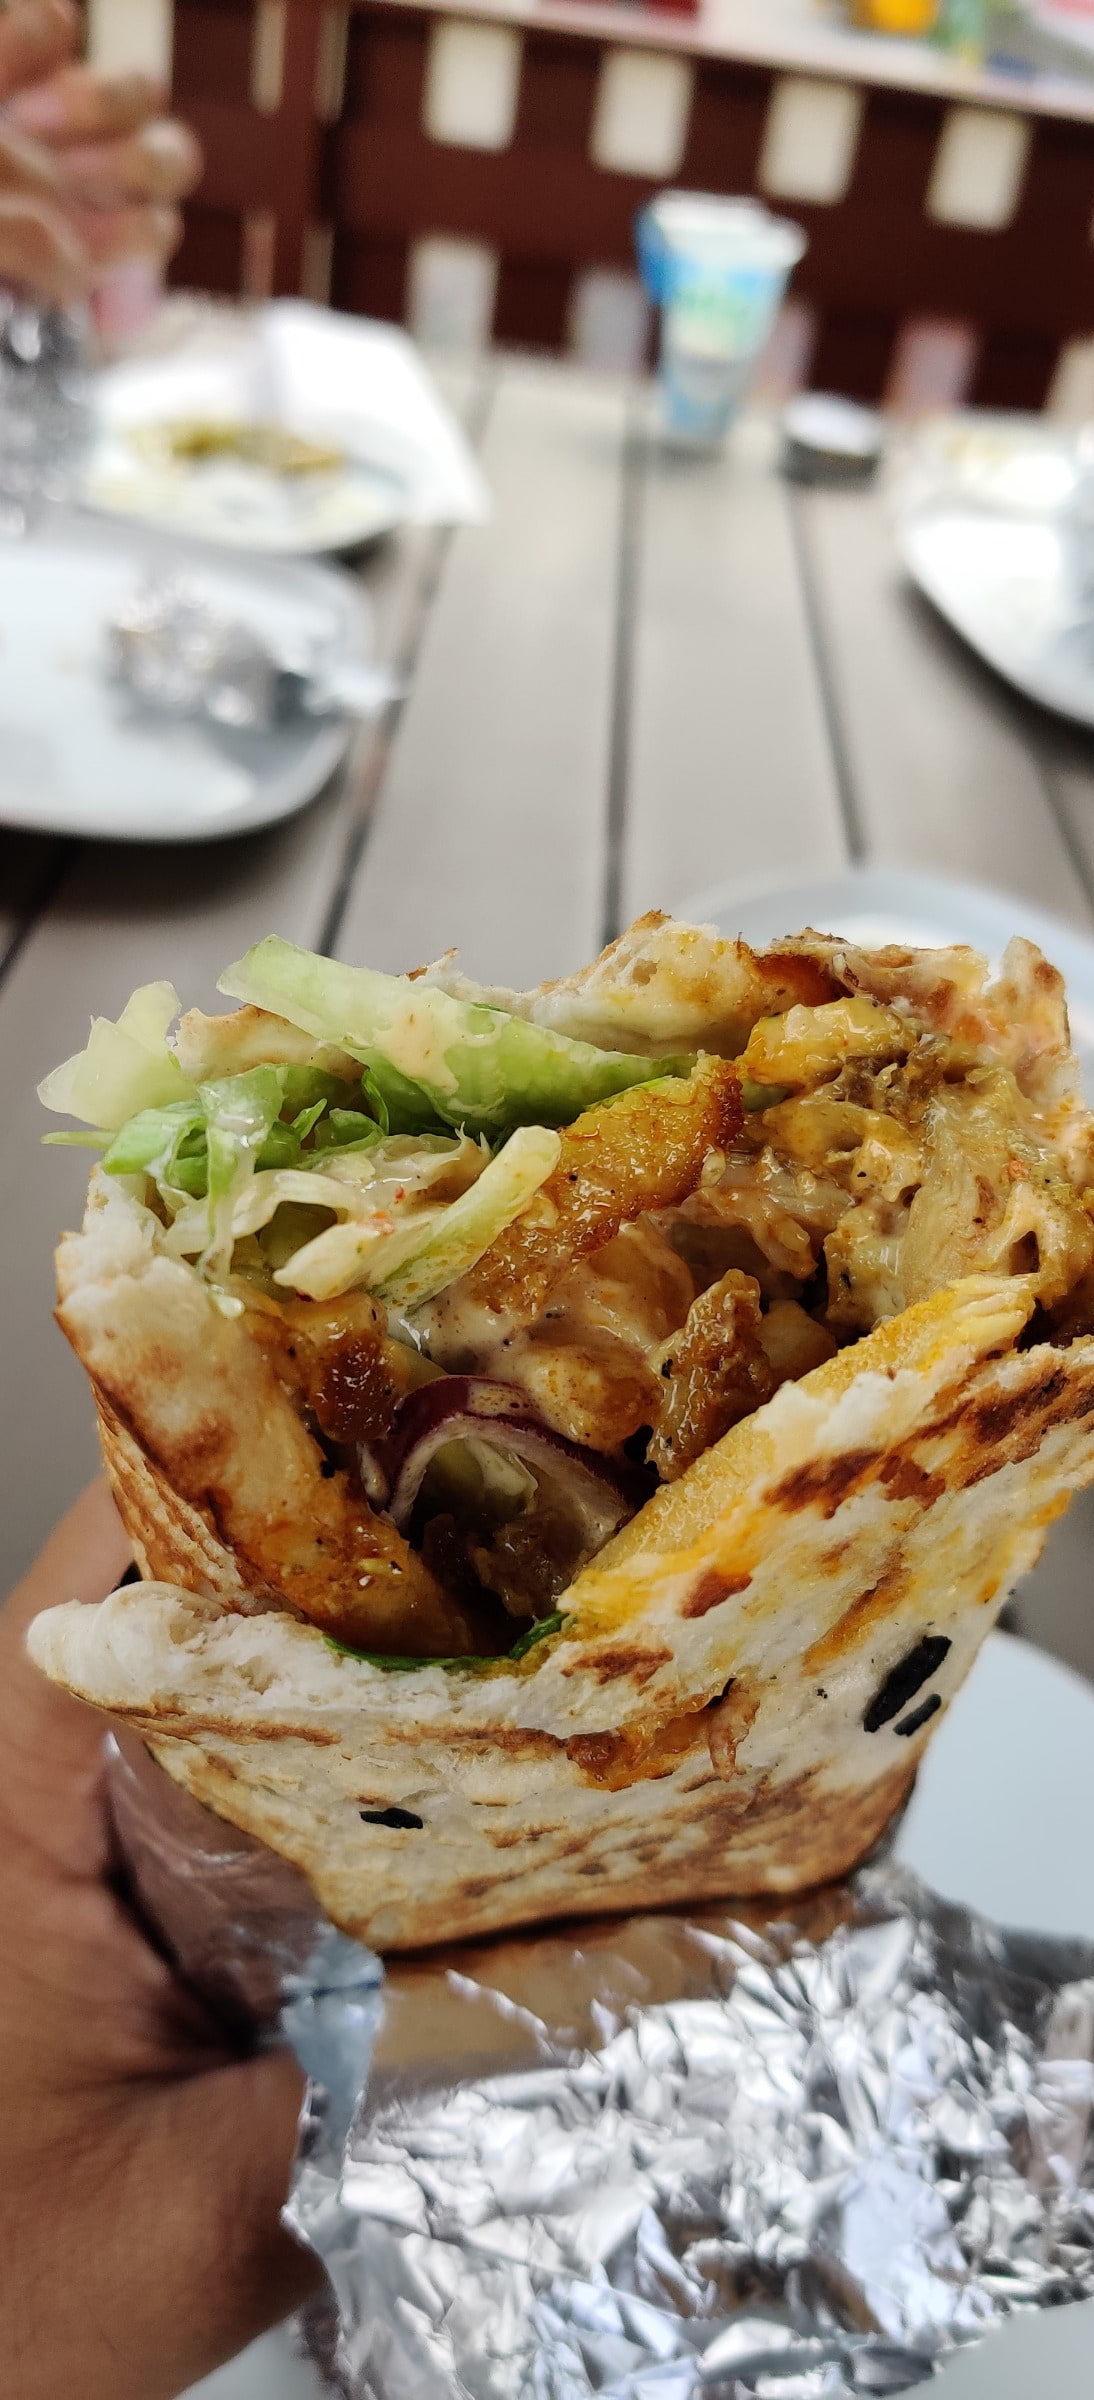 Shwarma rulle – Photo from Lilla Mellanöstern by Shahzad A. (15/06/2021)